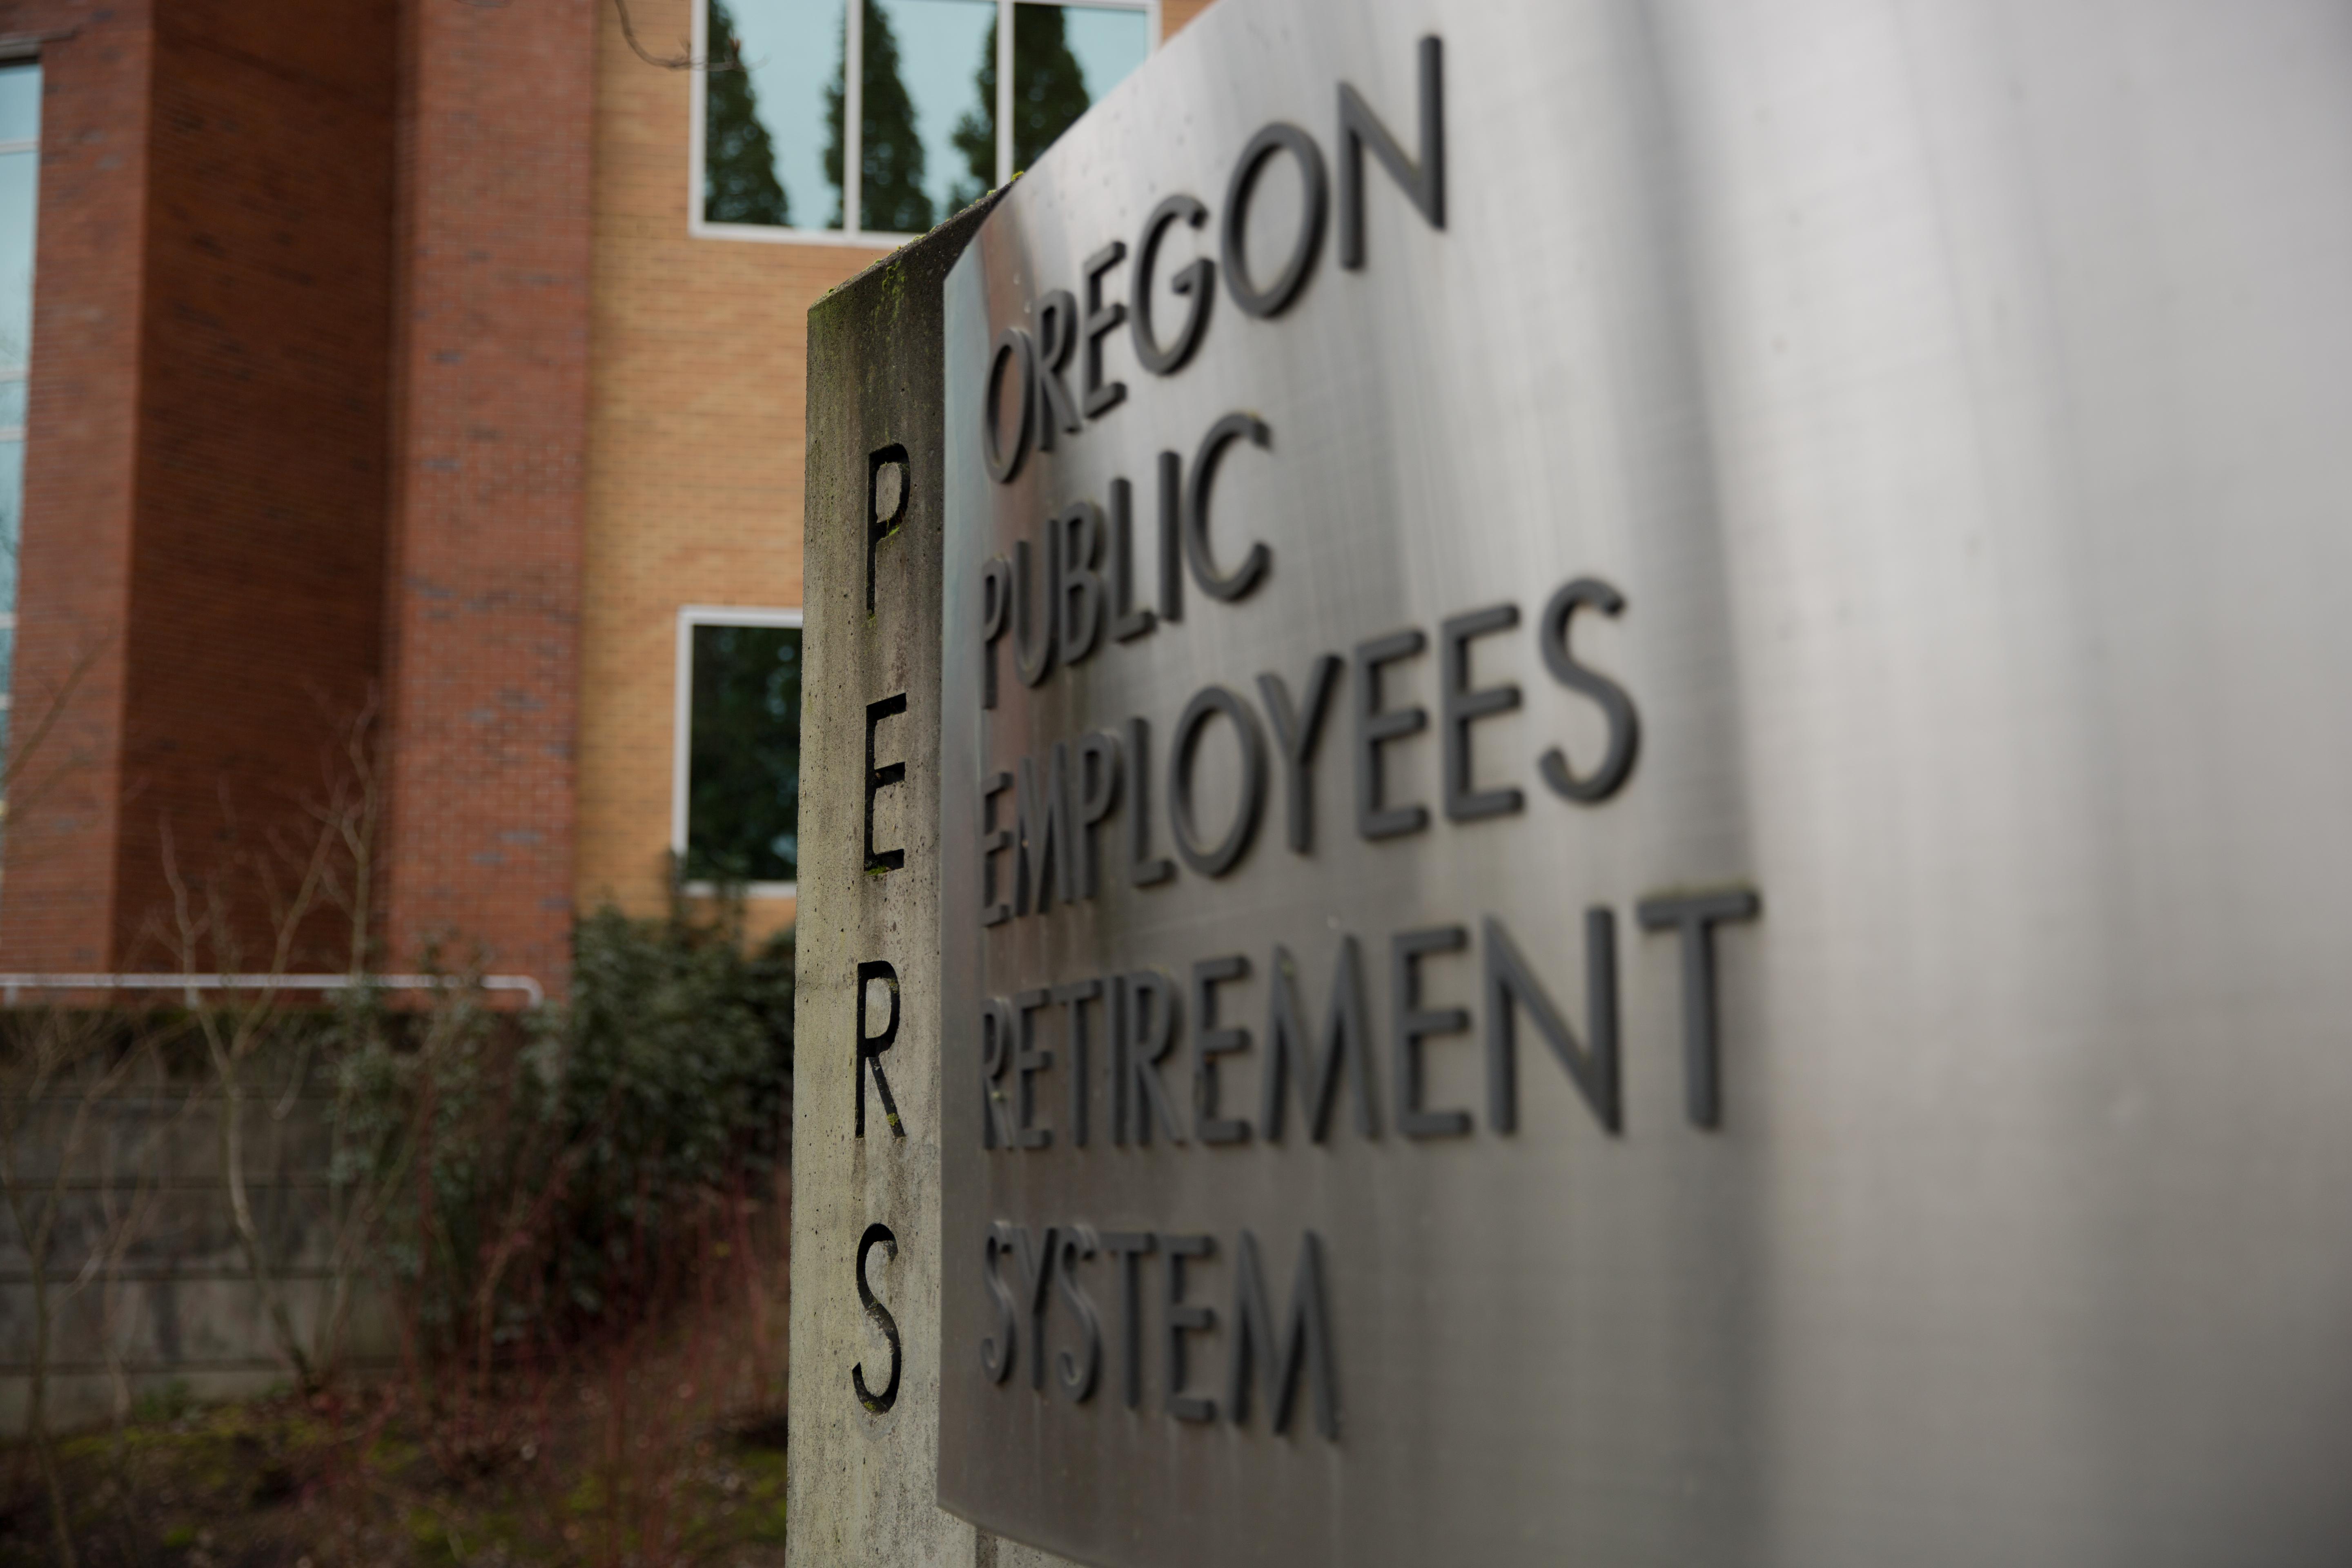 The Oregon Public Employees Retirement System (PERS) building in Tigard, Ore., on Sunday, Jan. 6, 2019.